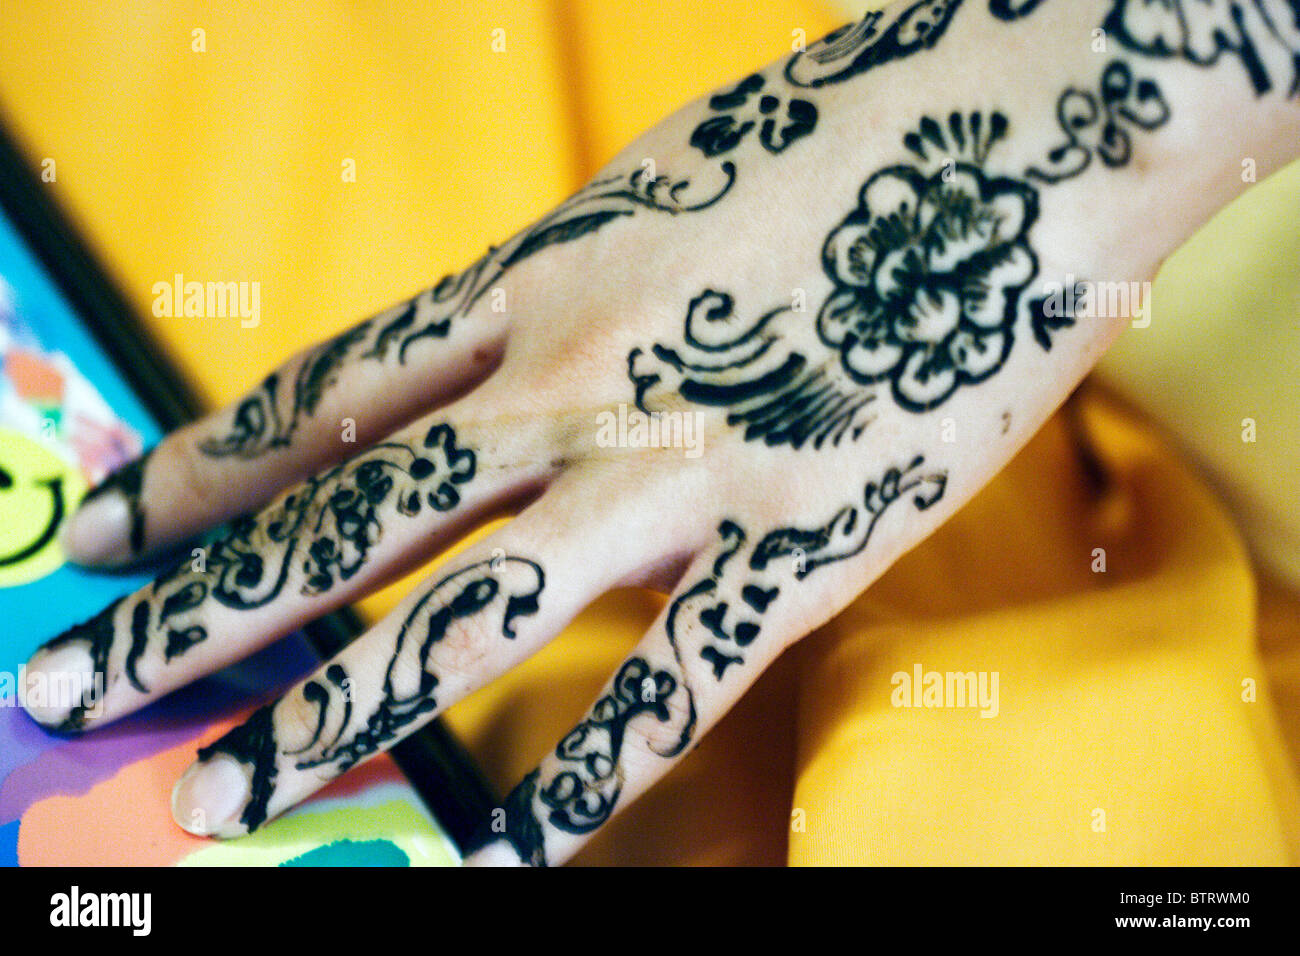 Young Muslim bride-to-be has elaborate henna designs painted on her ...